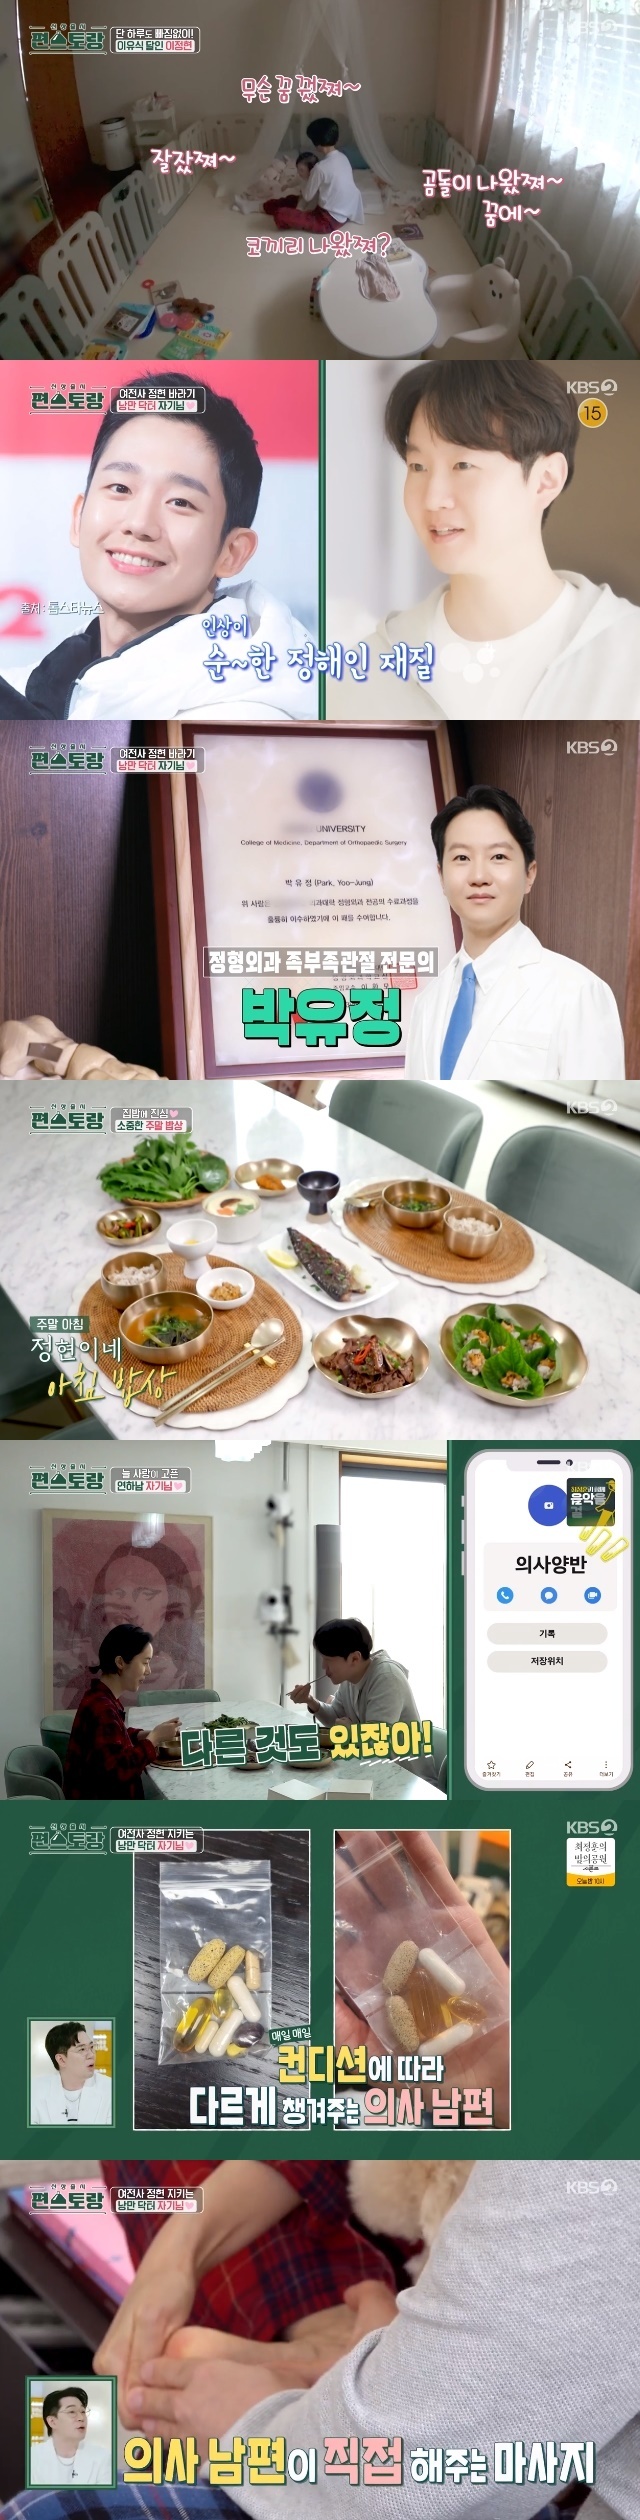 Singer and actor Lee Jung-hyun showed off Husbands sweet and mature side.Lee Jung-hyun Husbands face was unveiled for the first time in the 180th KBS 2TV entertainment Stars Top Recipe at Fun-Staurant (hereinafter Stars Top Recipe at Fun-Staurant) broadcast on June 16th.Lee Jung-hyun, who slept in a bed with Husband on the same day and woke up to the sound of the alarm, quickly took his first dog to the kitchen and then The Speech from his daughter SeoAs baby food.Lee Jung-hyun has not only finished four works while failing to appear on Stars Top Recipe at Fun-Staurant, but also boasted of being a mother.Lee Jung-hyun, who said, I was worried while pregnant The Speech, but I dont know how grateful I am that SeoA was born so healthy, was taking care of SeoA, who is now 12 months old, by feeding her baby food unconditionally even after filming all night.Lee Jung-hyun said, When my child is born, SeoA is so precious that I have to make it myself. I always give it a different taste because Im afraid of getting bitten. When I have a baby and see a baby, my energy explodes.Even Lee Jung-hyun was working with Husband on a day-to-day childcare map.After picking up his daughter SeoA, it was Man in the Kitchens turn, when Lee Jung-hyun showed off his rusty ability to cook using five fireballs at the same time, using all-purpose soy sauce.Lee Jung-hyun even took care of SeoA, who was sleeping while cooking like this.Then Lee Jung-hyuns Husband woke up and appeared in the kitchen, sorting out the marinade that was very naturally disturbed and collecting separately.Lee Jung-hyuns third-year-old Husband Park Yoo-jung was the one who showed off his sweet face from the beginning.He praised the cast members by saying, It is too good, I feel like a gentle person, I am a college student couple, and This is my family history. He also prayed for orthopedic ankle joints.Husband Lee Jung-hyun, who had a delicious 7-piece Man in the Kitchen with the help of Park Yoo-jung, diligently took Husband on the table.Husband said, Yesterday I had a late surgery and I could not rest for almost a second before I left. After surgery, I took off my hat and mask.In the past, it was okay (without a mark) even after a little time, but now it remains at home. He said, What are you saying when you are younger than me? Lee Jung-hyun, who has been married for four years, continued his realistic reaction to Husbands remarks that he would like to walk with Lee Jung-hyun when he goes out to eat. Do not do that. Im too tired.Lee Jung-hyun reacted to Husbands reluctance, saying, Im always sad; if Im holding SeoA, come next to me and give me a hug (as well).I added an anecdote that changed Husbands cell phone number, which is stored as Bebe , to Doctor or Orthopedic Surgery sometimes when I get angry.However, Lee Jung-hyun said, When others see me, I think I do not love the groom, but I really love him. Ryu Soo-young responded, I saw everything you love in Man in the Kitchen. It was full.In addition, Lee Jung-hyun said, The groom gives me nutrients every morning. If I eat too much nutrients, I will not go to the liver. Sometimes I increase omega and add folic acid.There are many action movies that require a lot of physical strength, and the groom has improved my physical strength. When I go out at dawn, I put it in a small plastic bag the night before and put it in my bag. Husband boasted of his tenderness.Lee Jung-hyuns Husband in the actual video showed Lee Jung-hyuns feet and shoulders to massage.